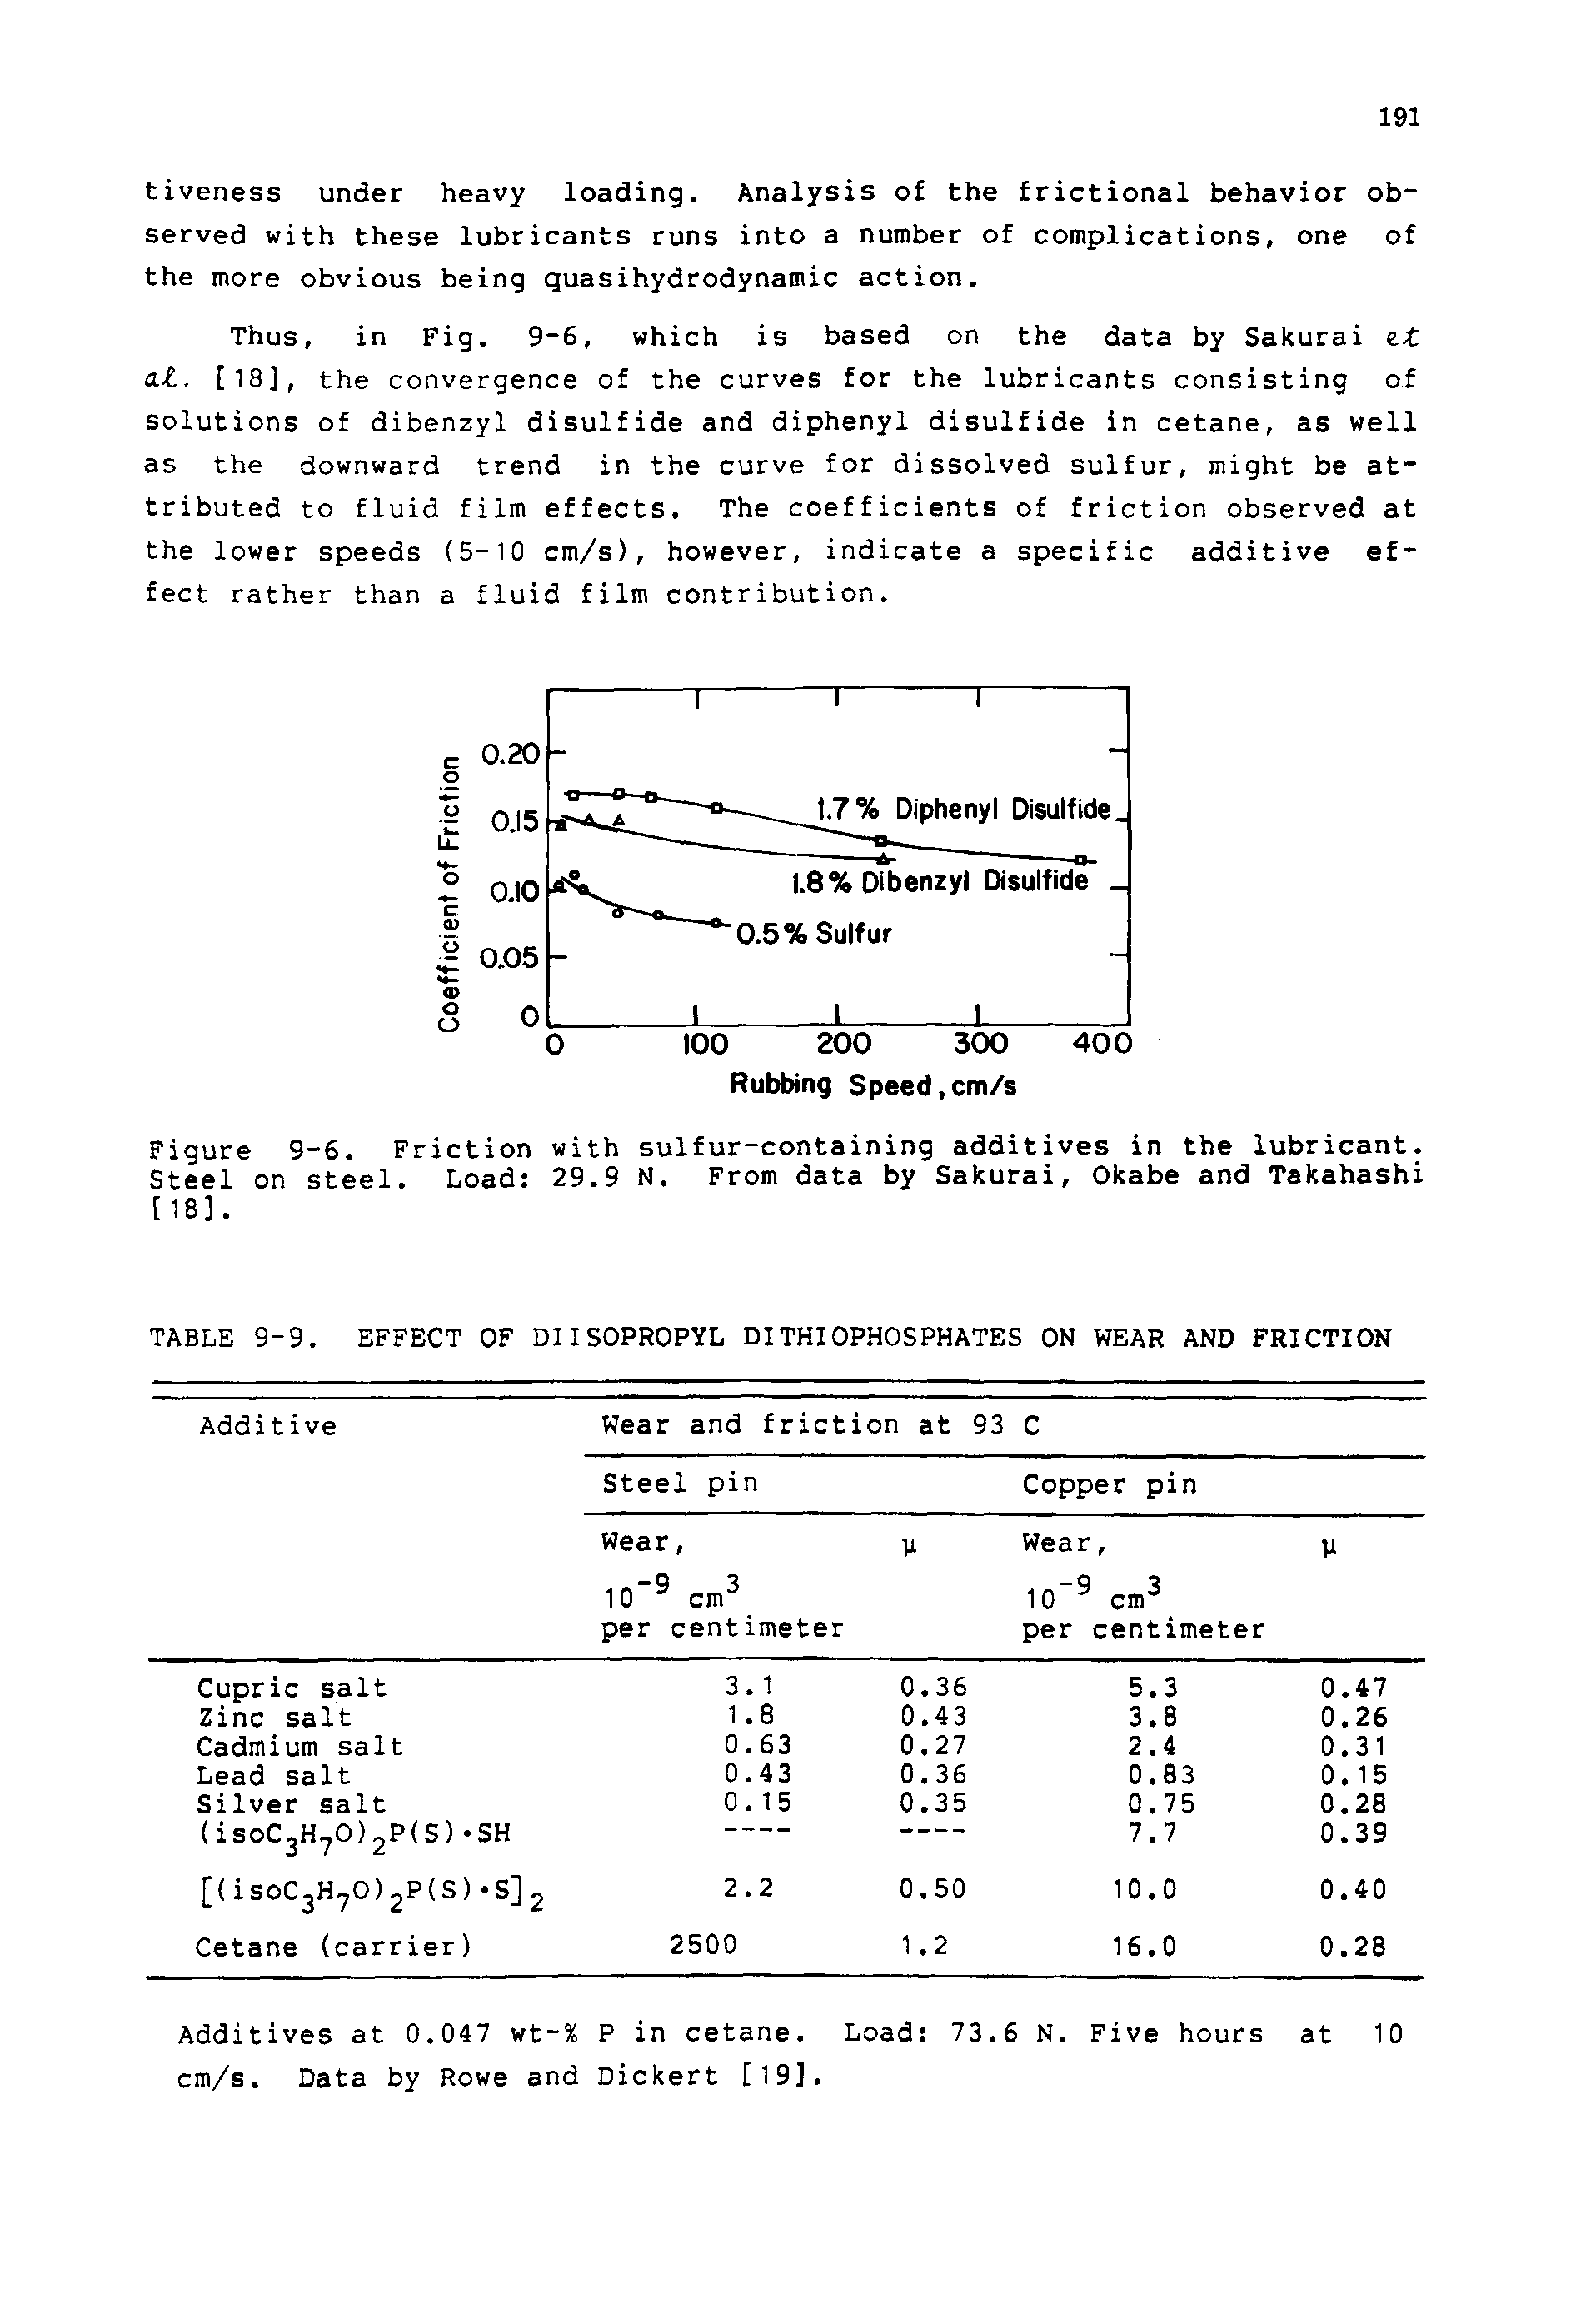 Figure 9-6. Friction with sulfur-containing additives in the lubricant. Steel on steel. Load 29.9 N. From data by Sakurai, Okabe and Takahashi [18],...